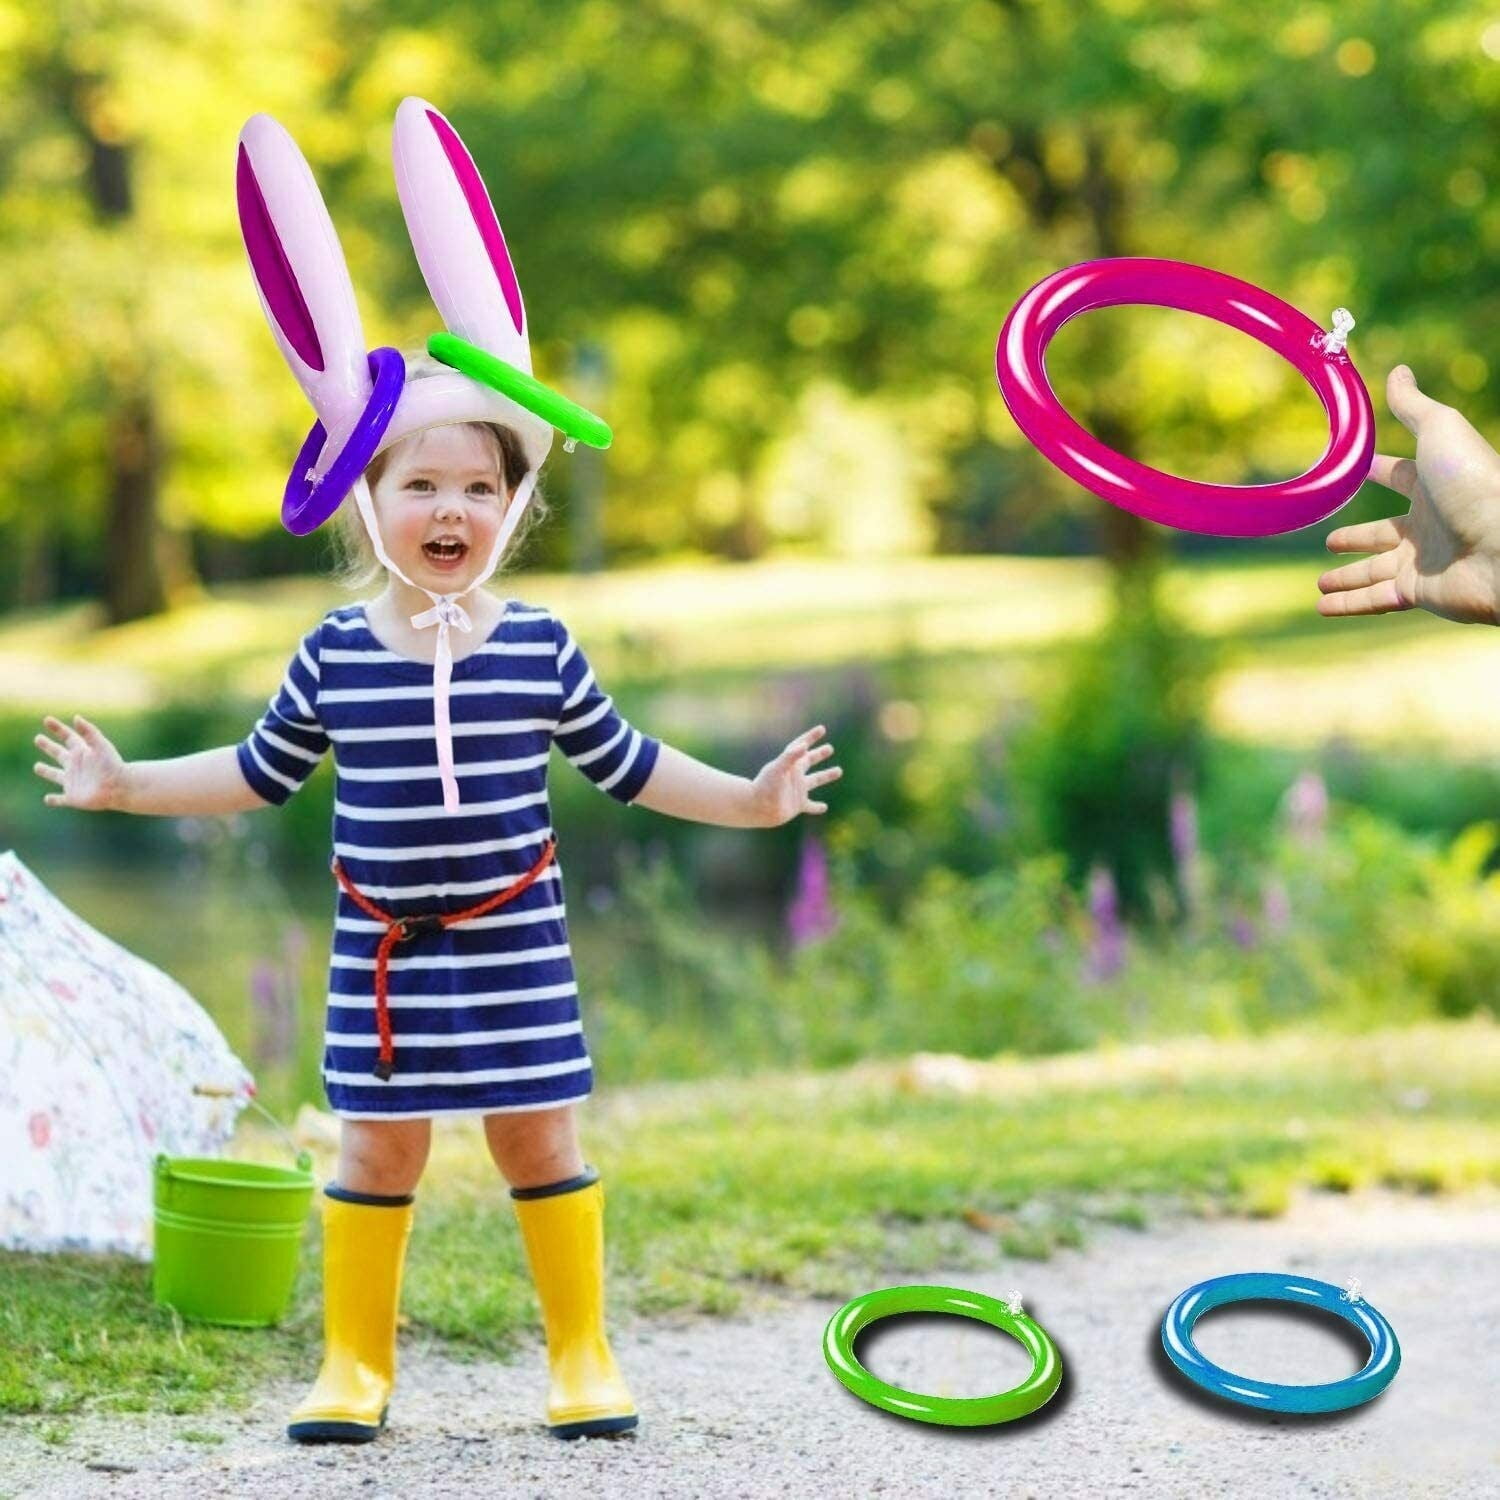 6 Sets, 24 Rings 6 Packs Easter Inflatable Bunny Ears Ring Toss Game Easter Rabbit Ears and Colorful Rings for Easter Gifts Easter Party Games Favors Supplies Kids Indoor Outdoor Toys 